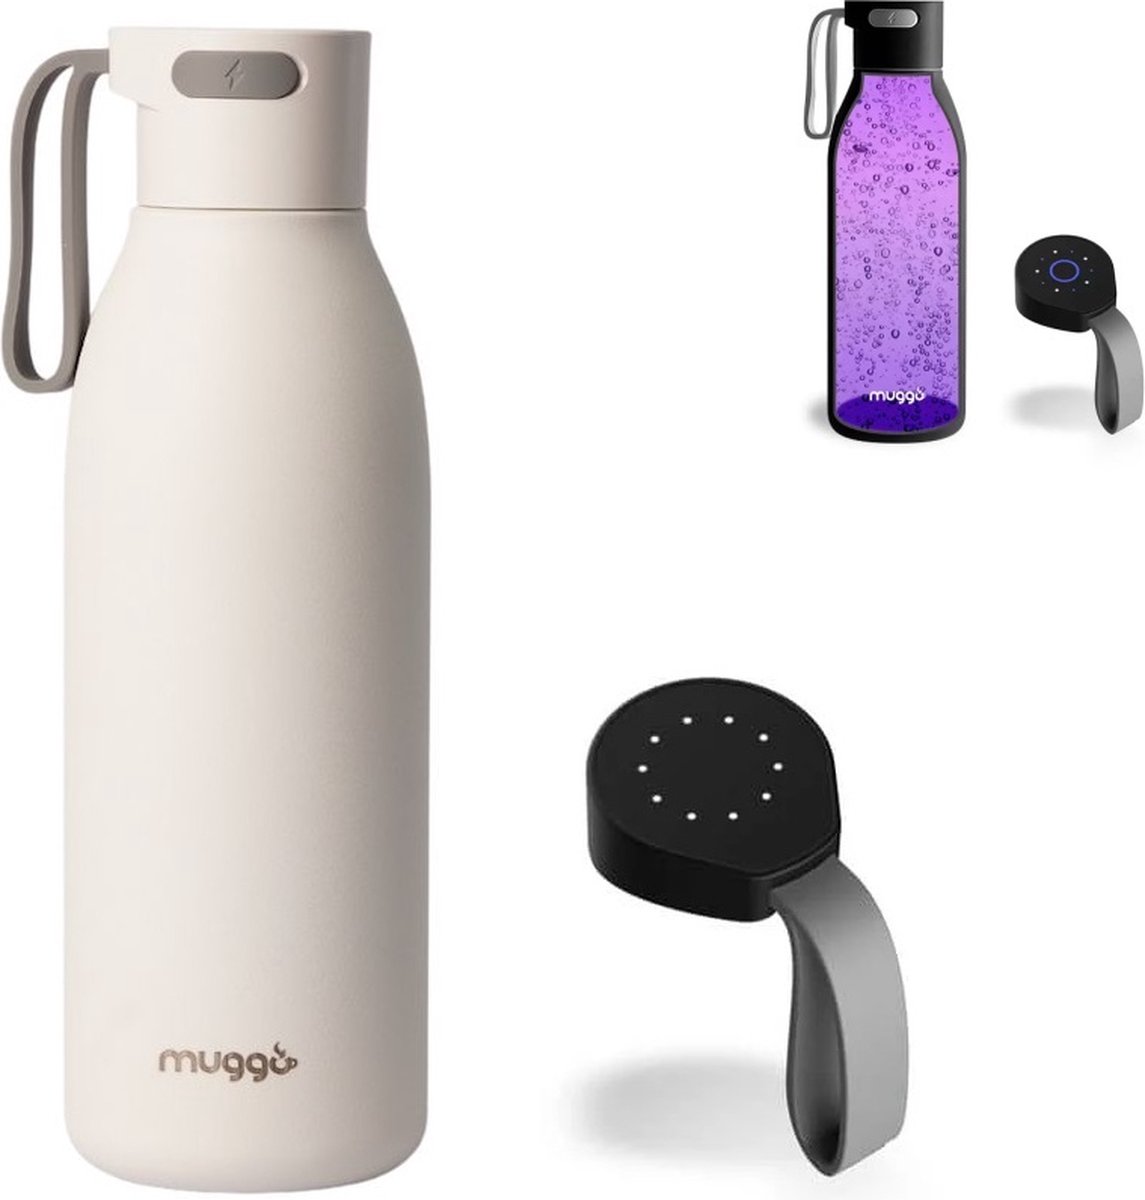 Muggo Pure - Slimme Waterfles - Smart Thermosfles - Drinkfles UV Sterilisatie - Mat Wit Staal - 750ml - LED verlichting - Wit